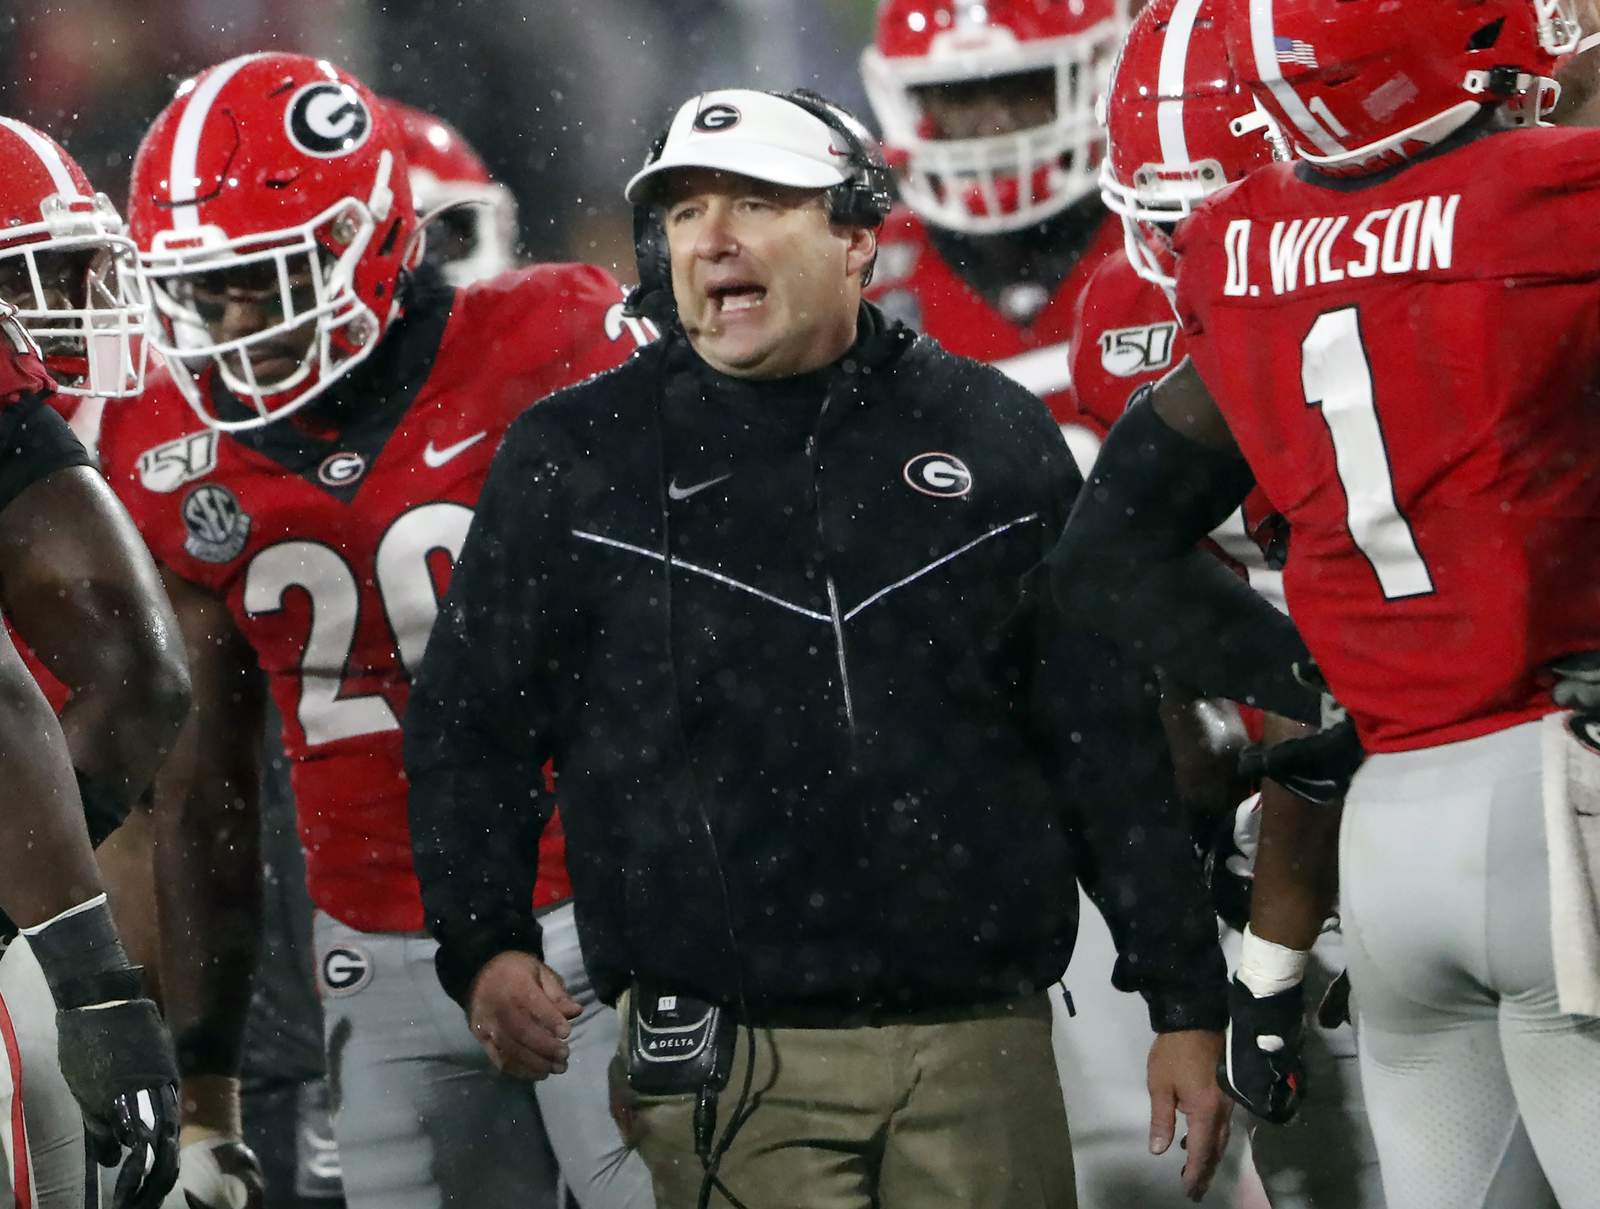 Former UGa player says he experienced racism, manipulation